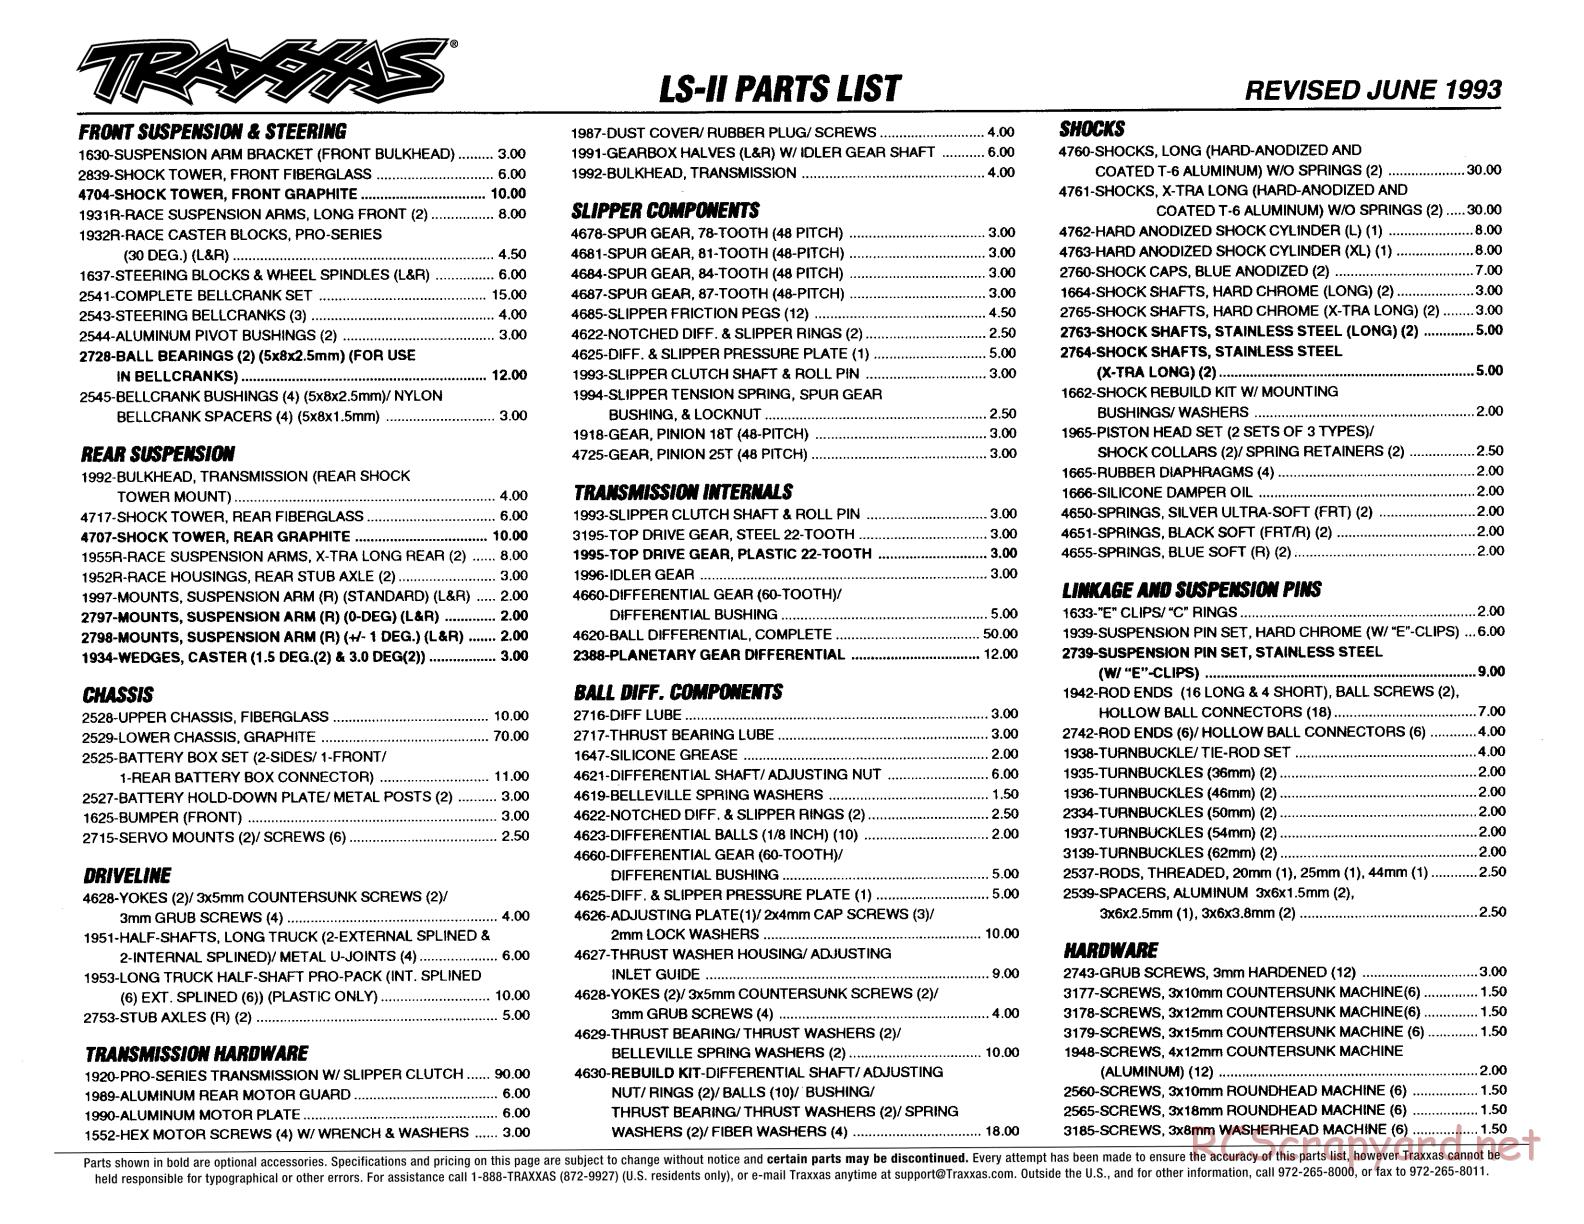 Traxxas - LS-II - Parts List - Page 1